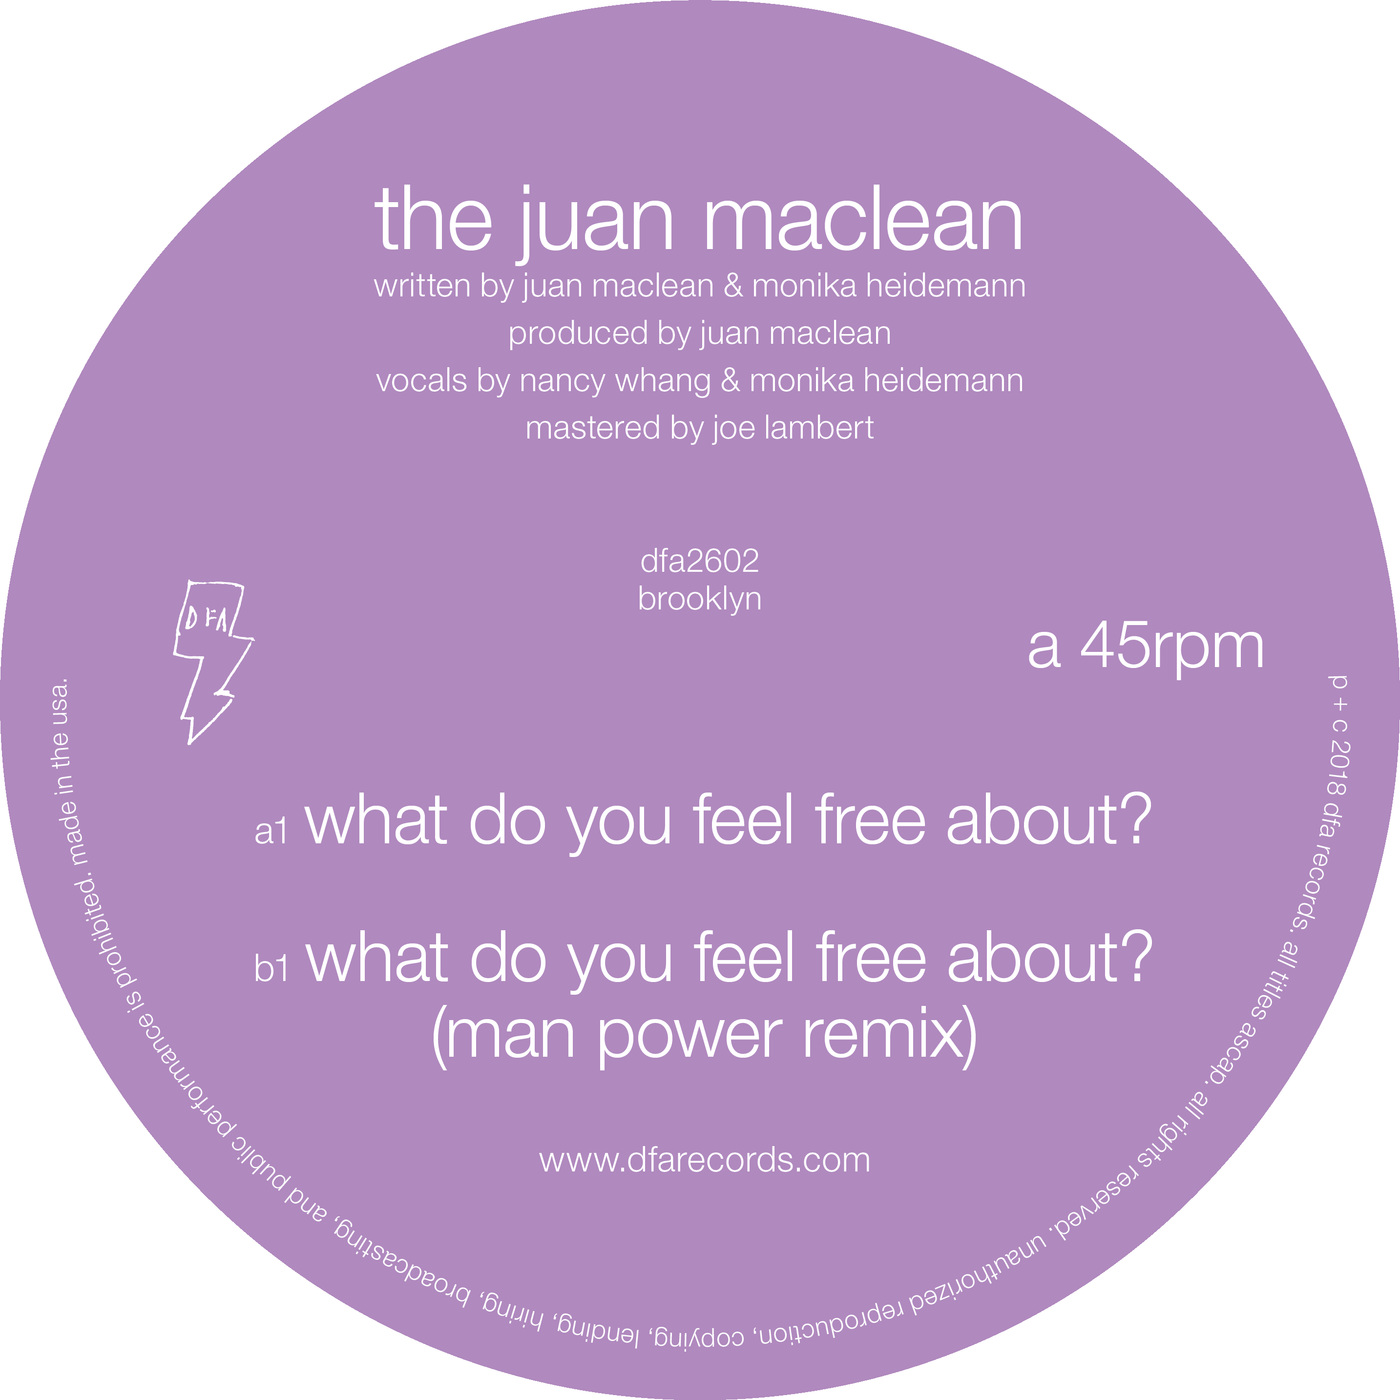 The Juan Maclean - What Do You Feel Free About? / DFA